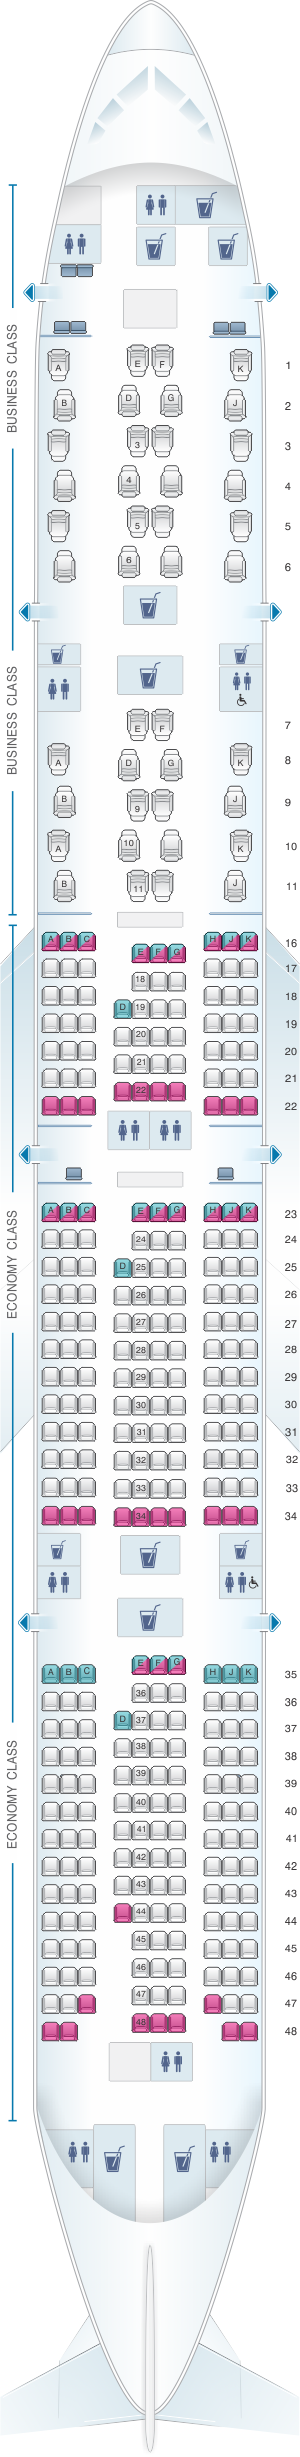 boeing 777 300 seating chart